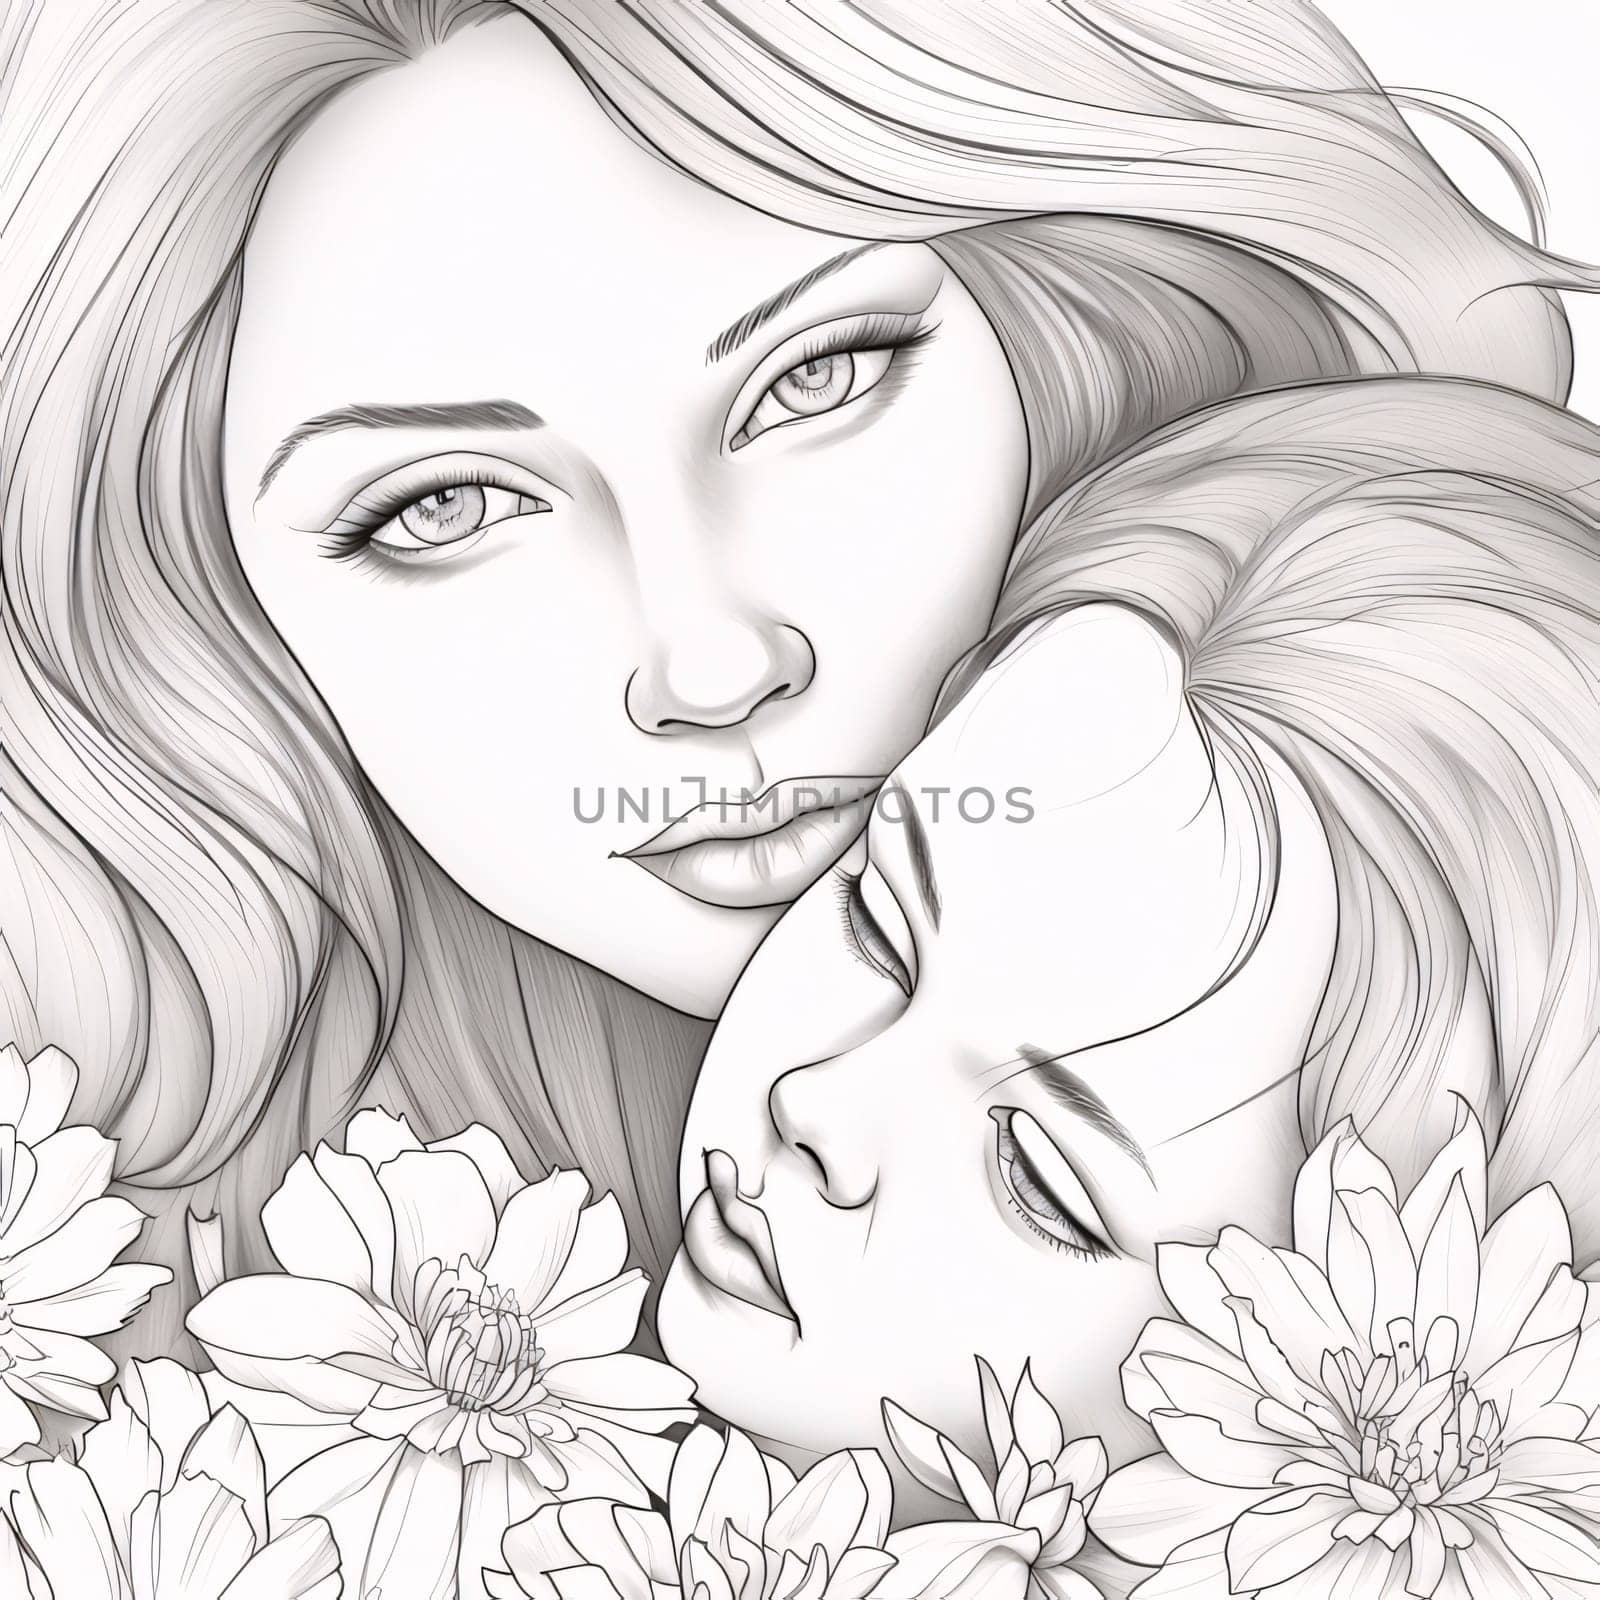 Mother's Day: Portrait of a beautiful girl with long hair. Vector illustration.